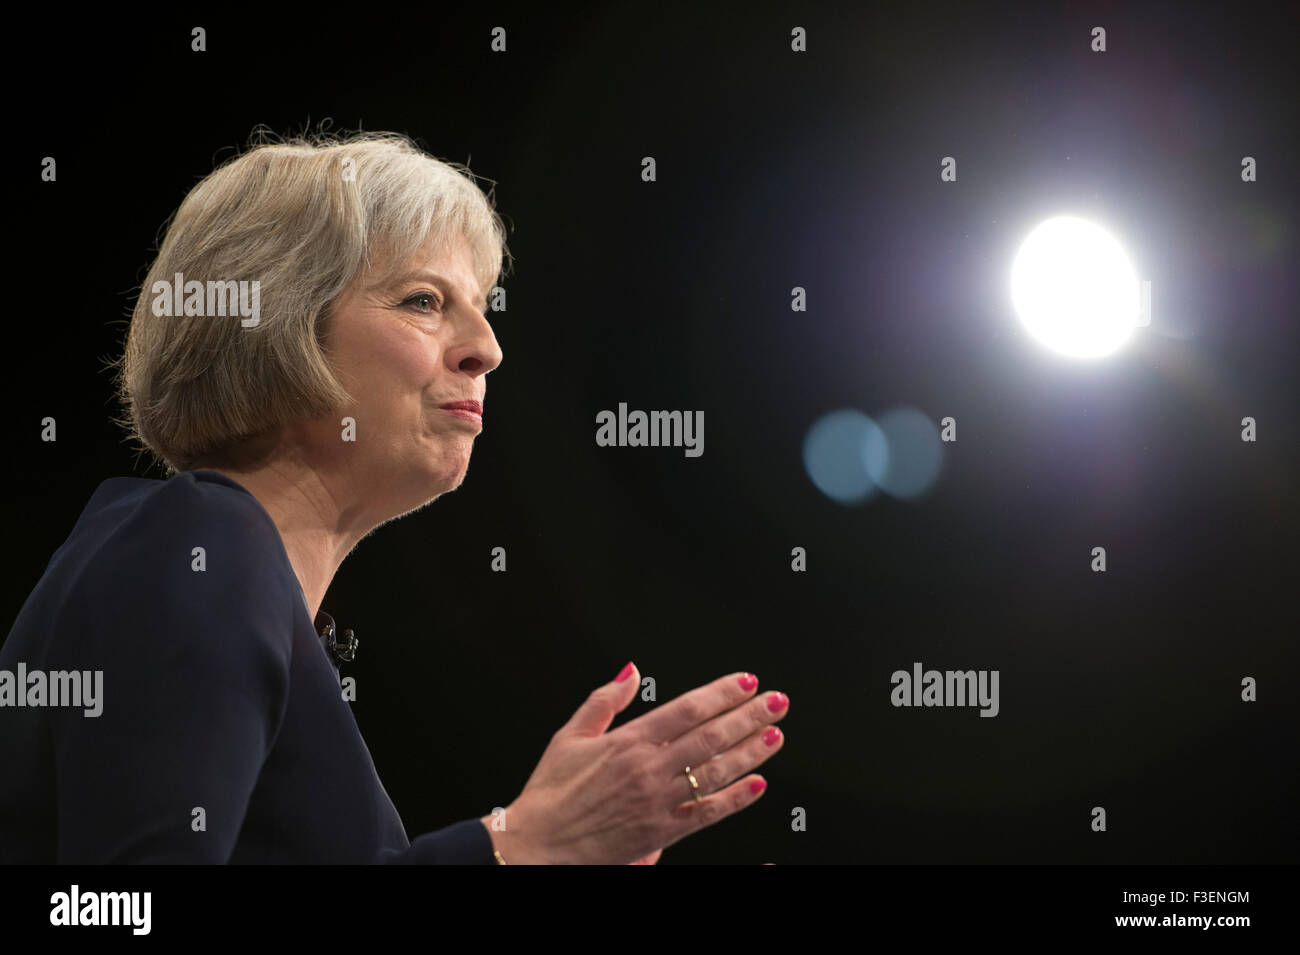 Manchester, UK. 6th October 2015. The Rt Hon Theresa May MP, Secretary of State for the Home Department speaks at Day 3 of the 2015 Conservative Party Conference in Manchester. Credit:  Russell Hart/Alamy Live News. Stock Photo